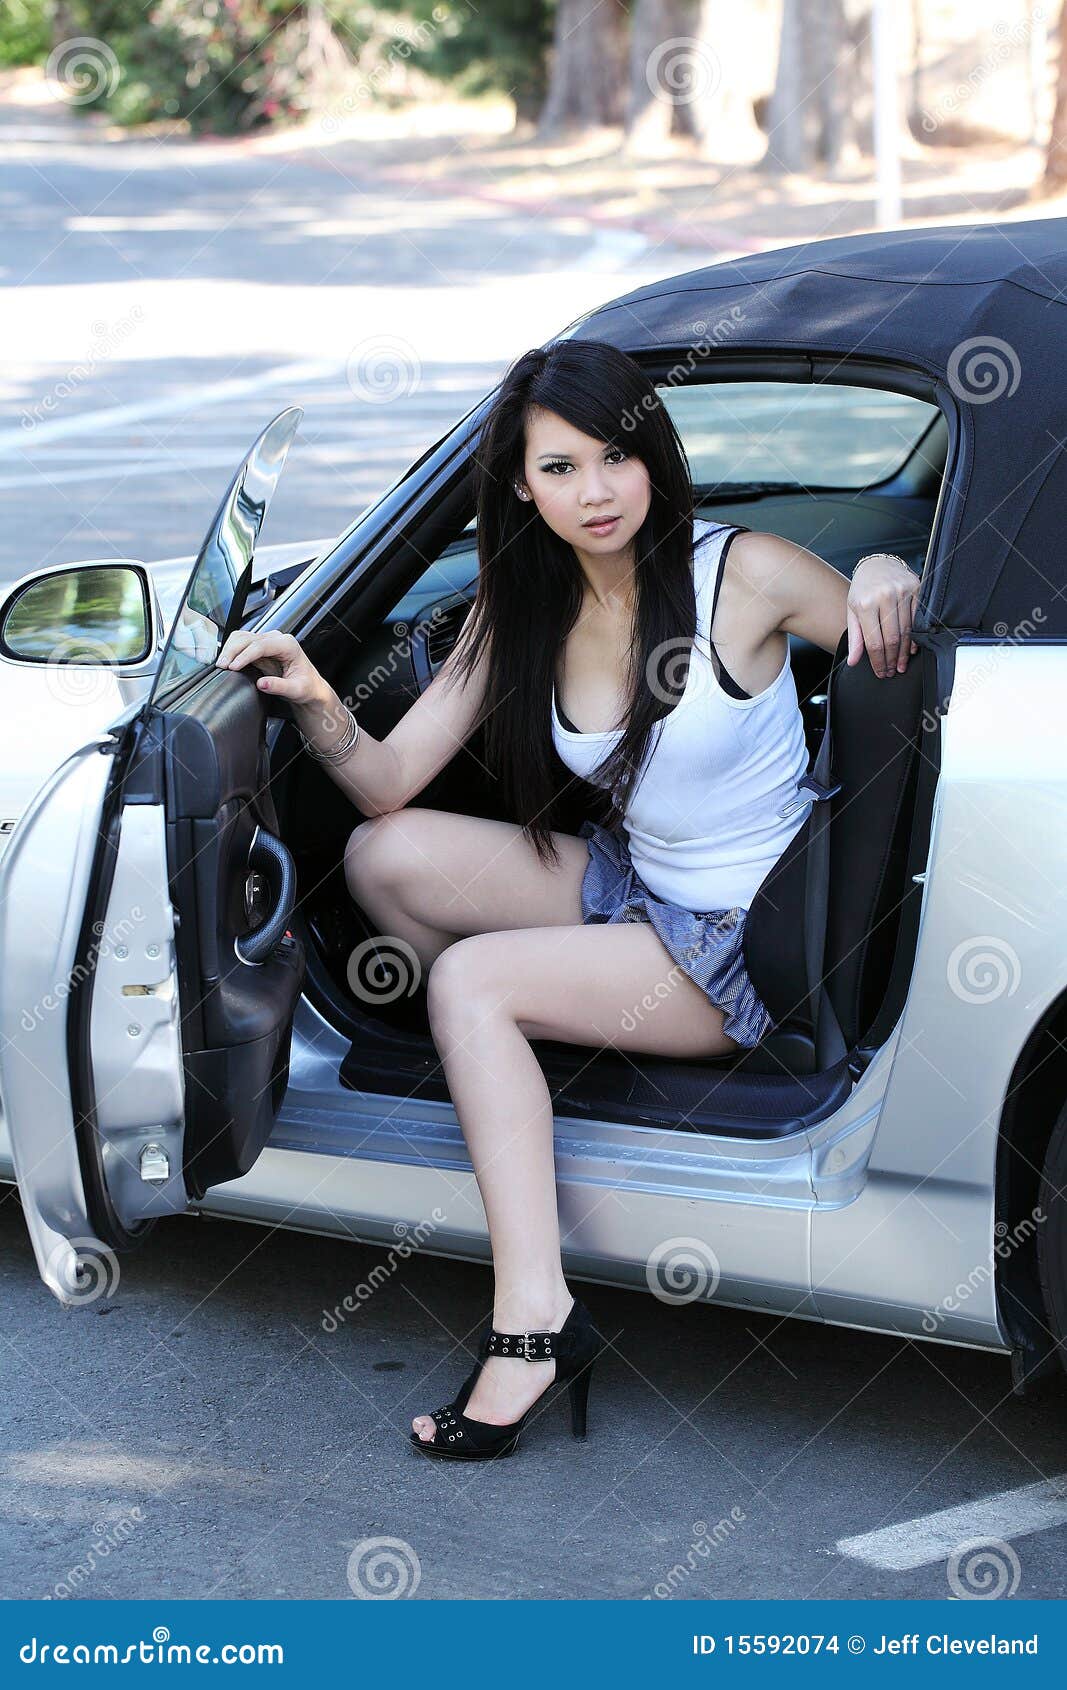 Sexy Legs Short Skirt Getting Out Of Car